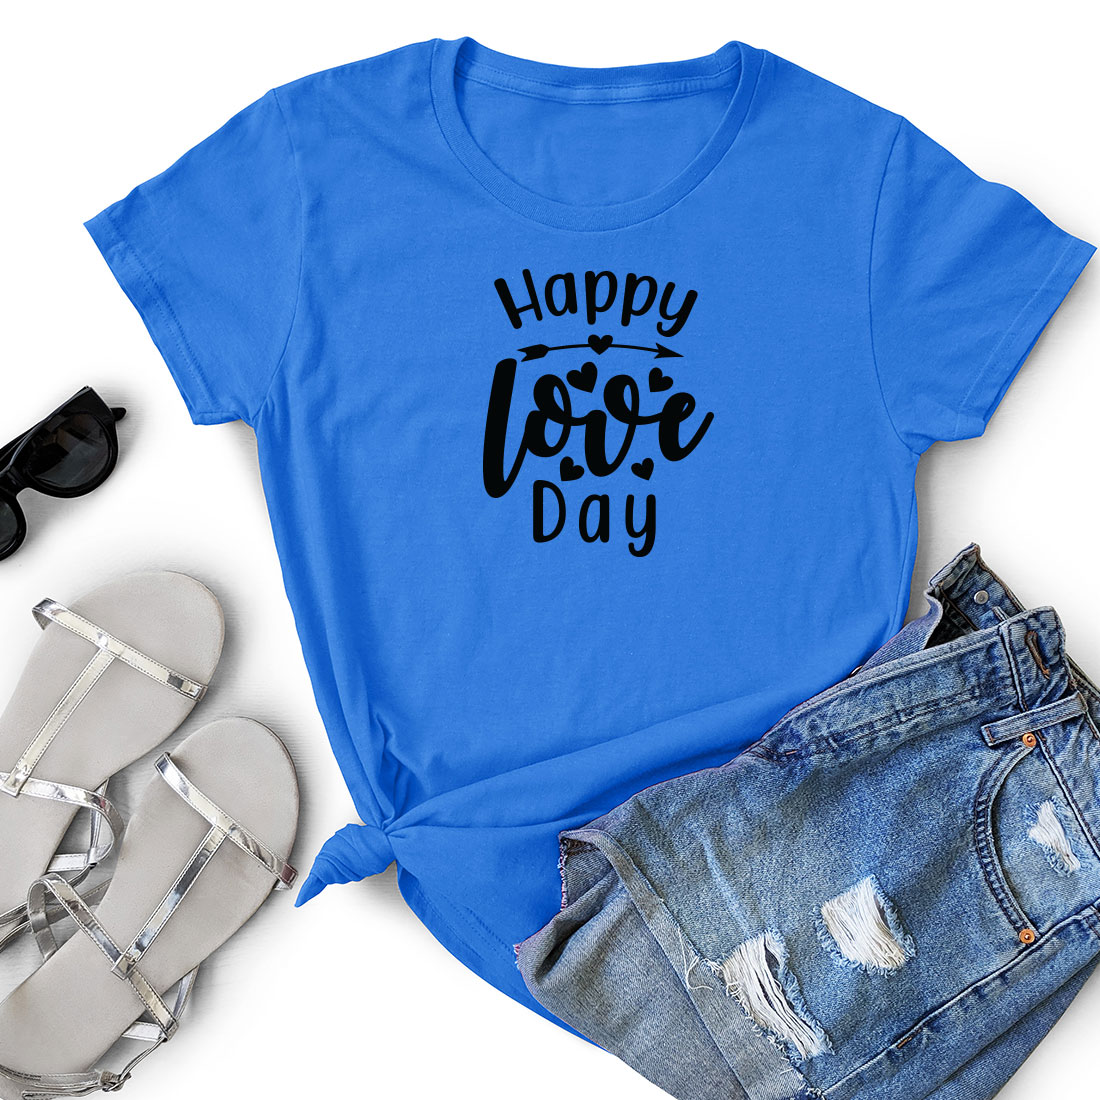 T - shirt that says happy love day next to a pair of shorts.